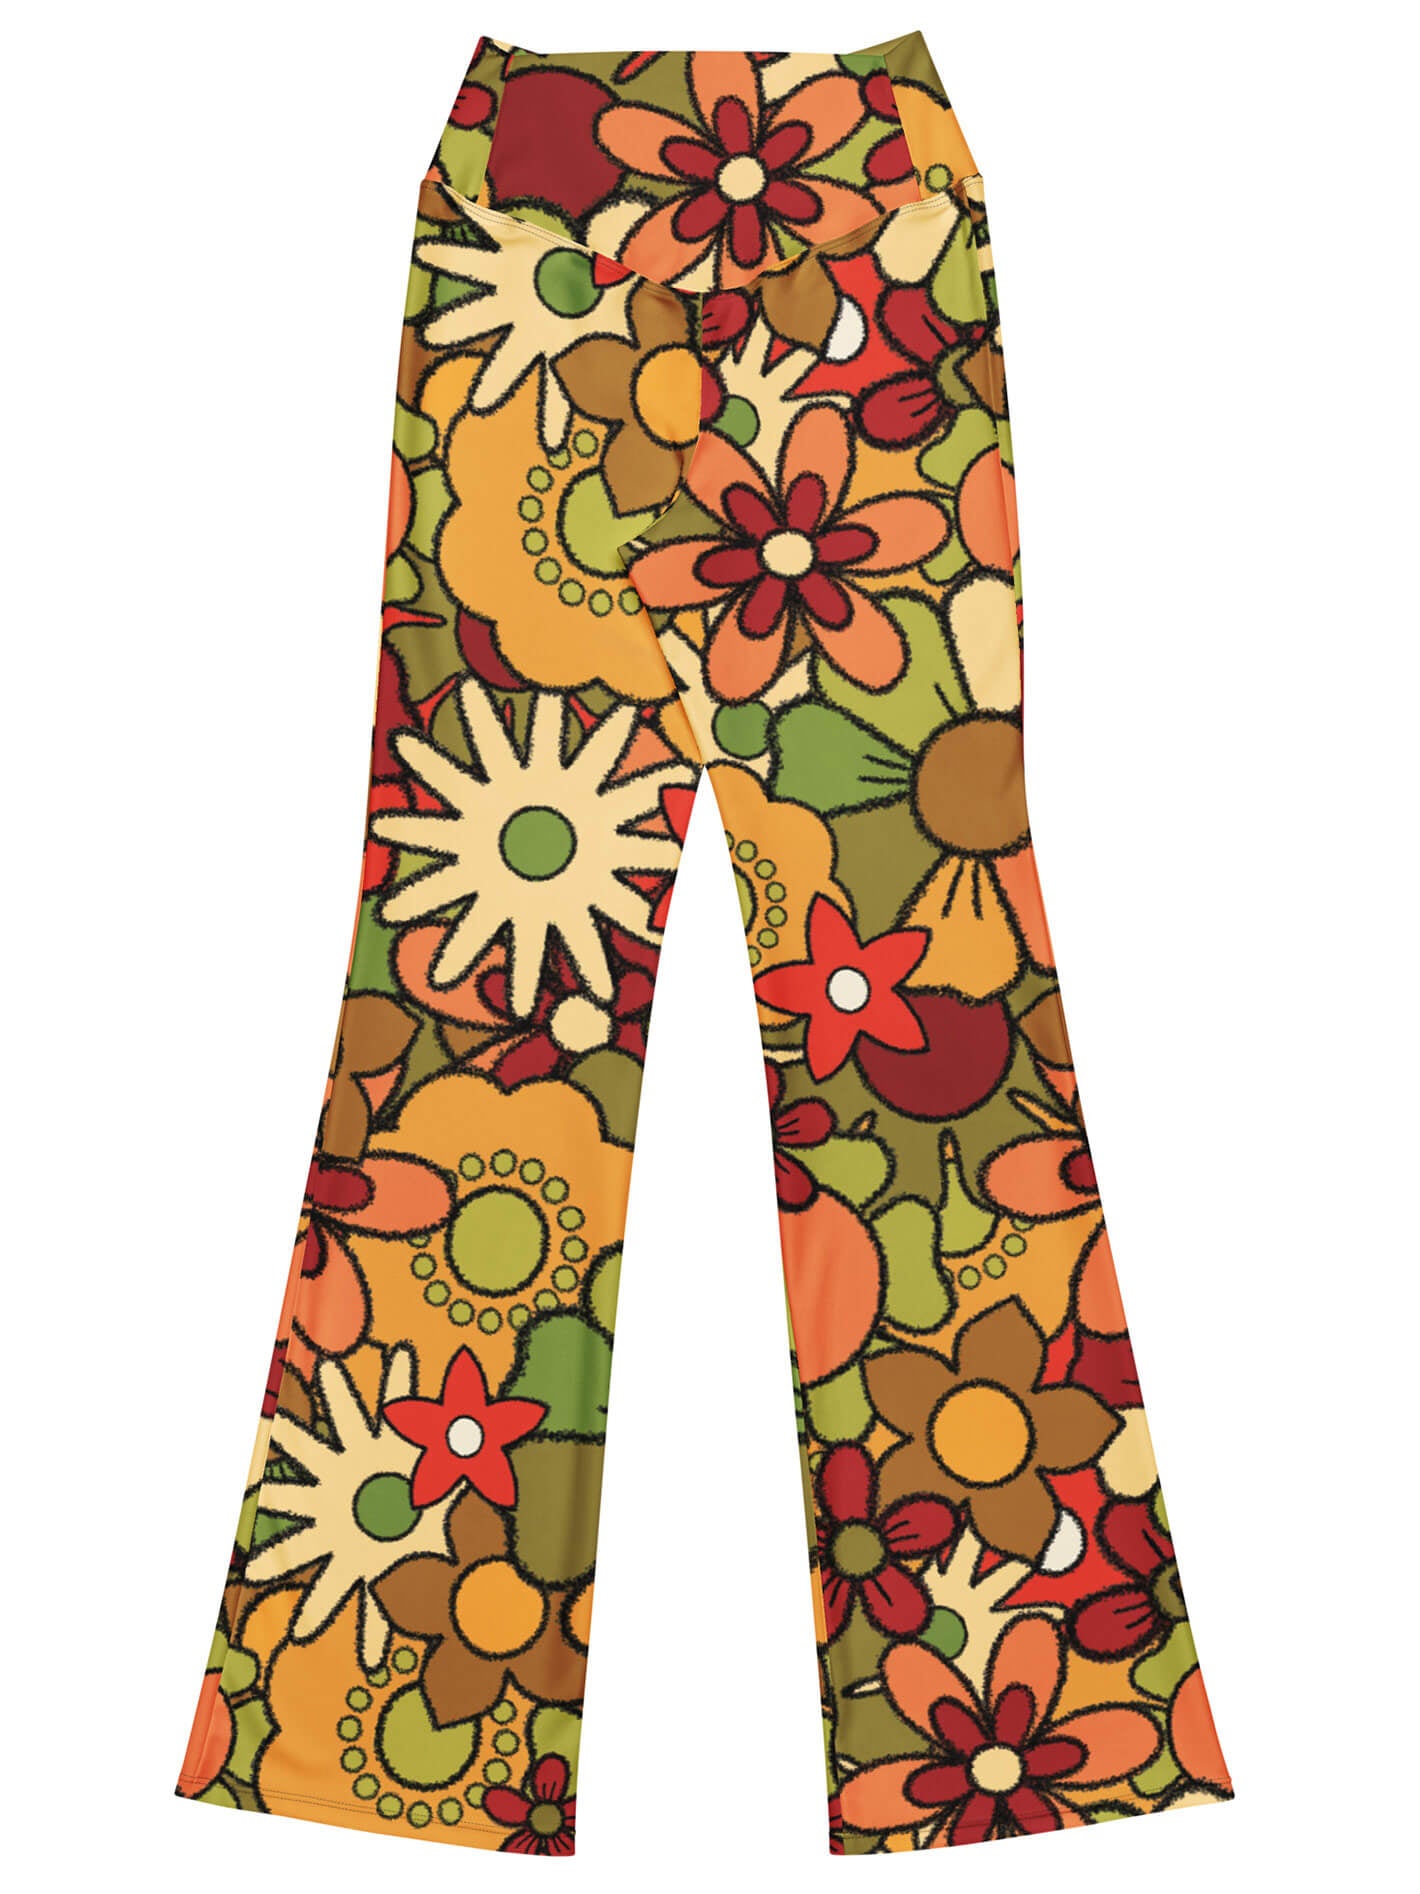 Groovy 80s floral plus size flare pants.